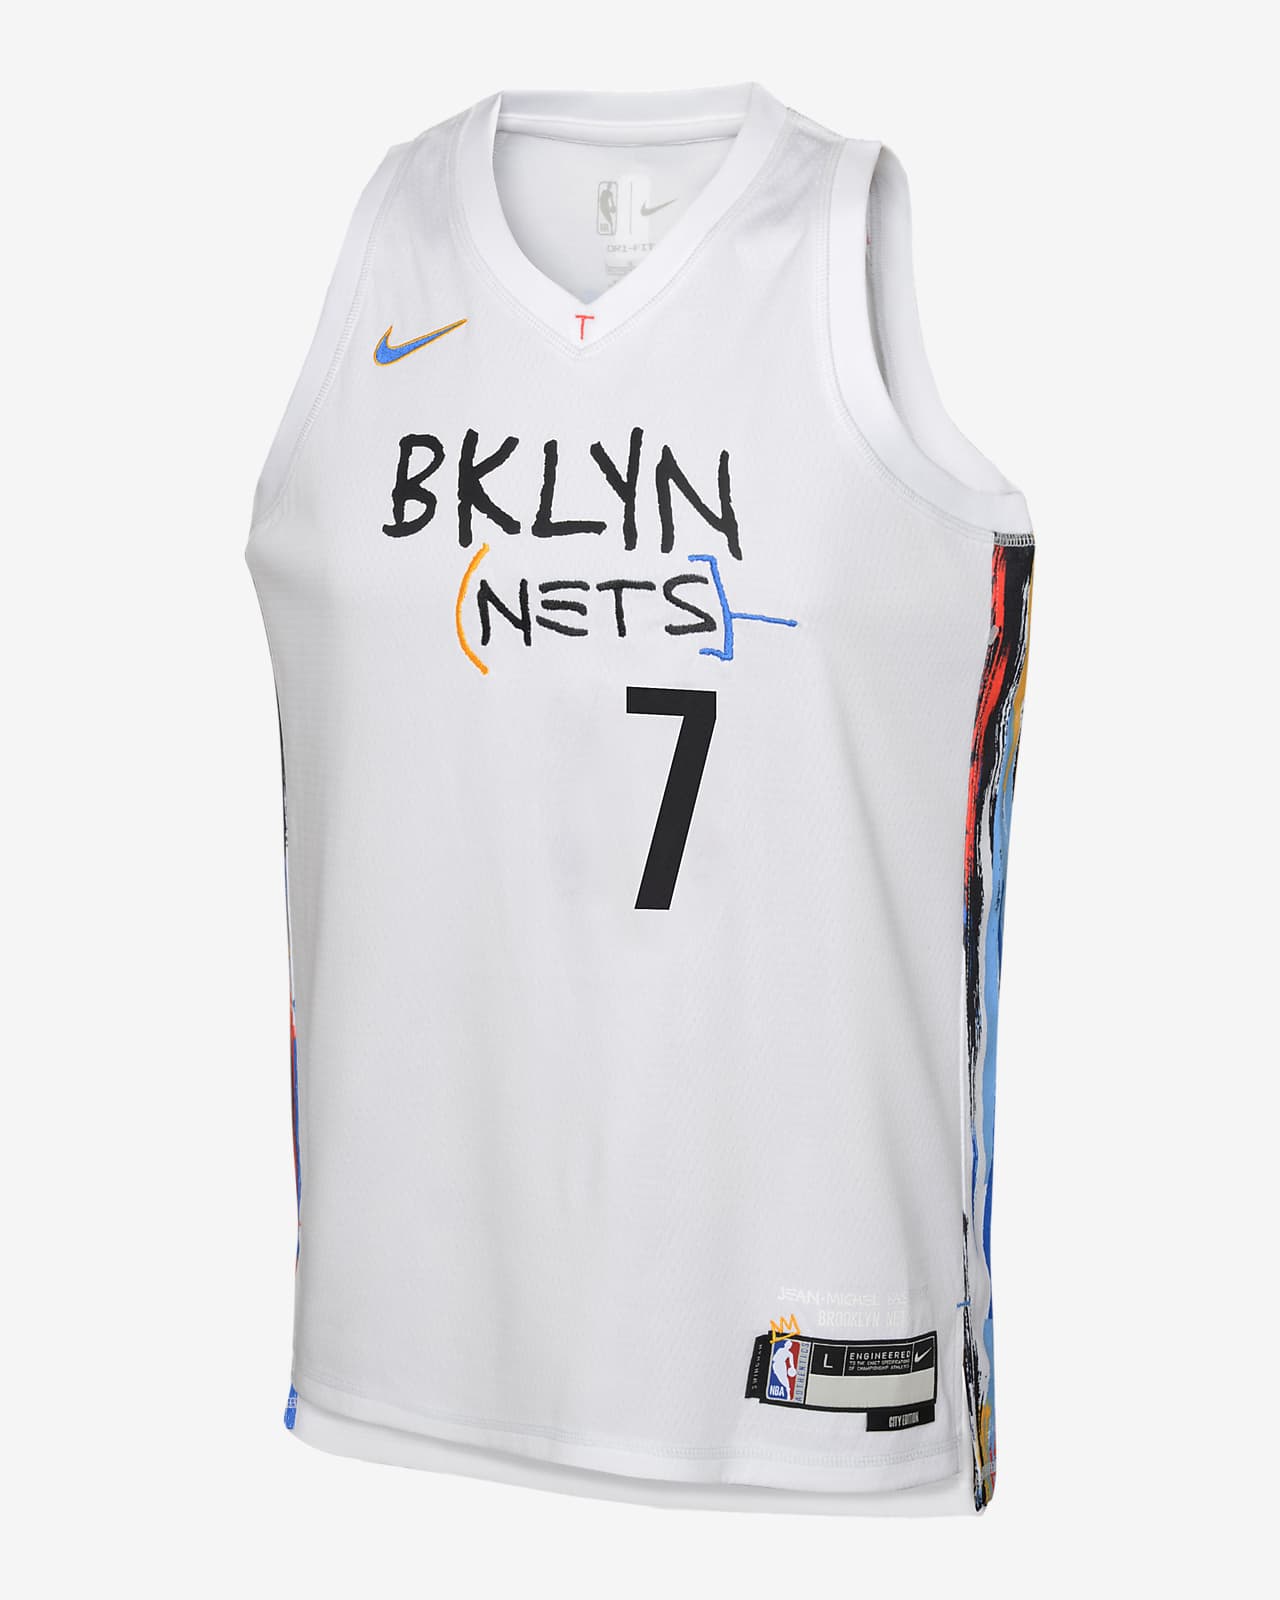 kevin durant nets city edition jersey